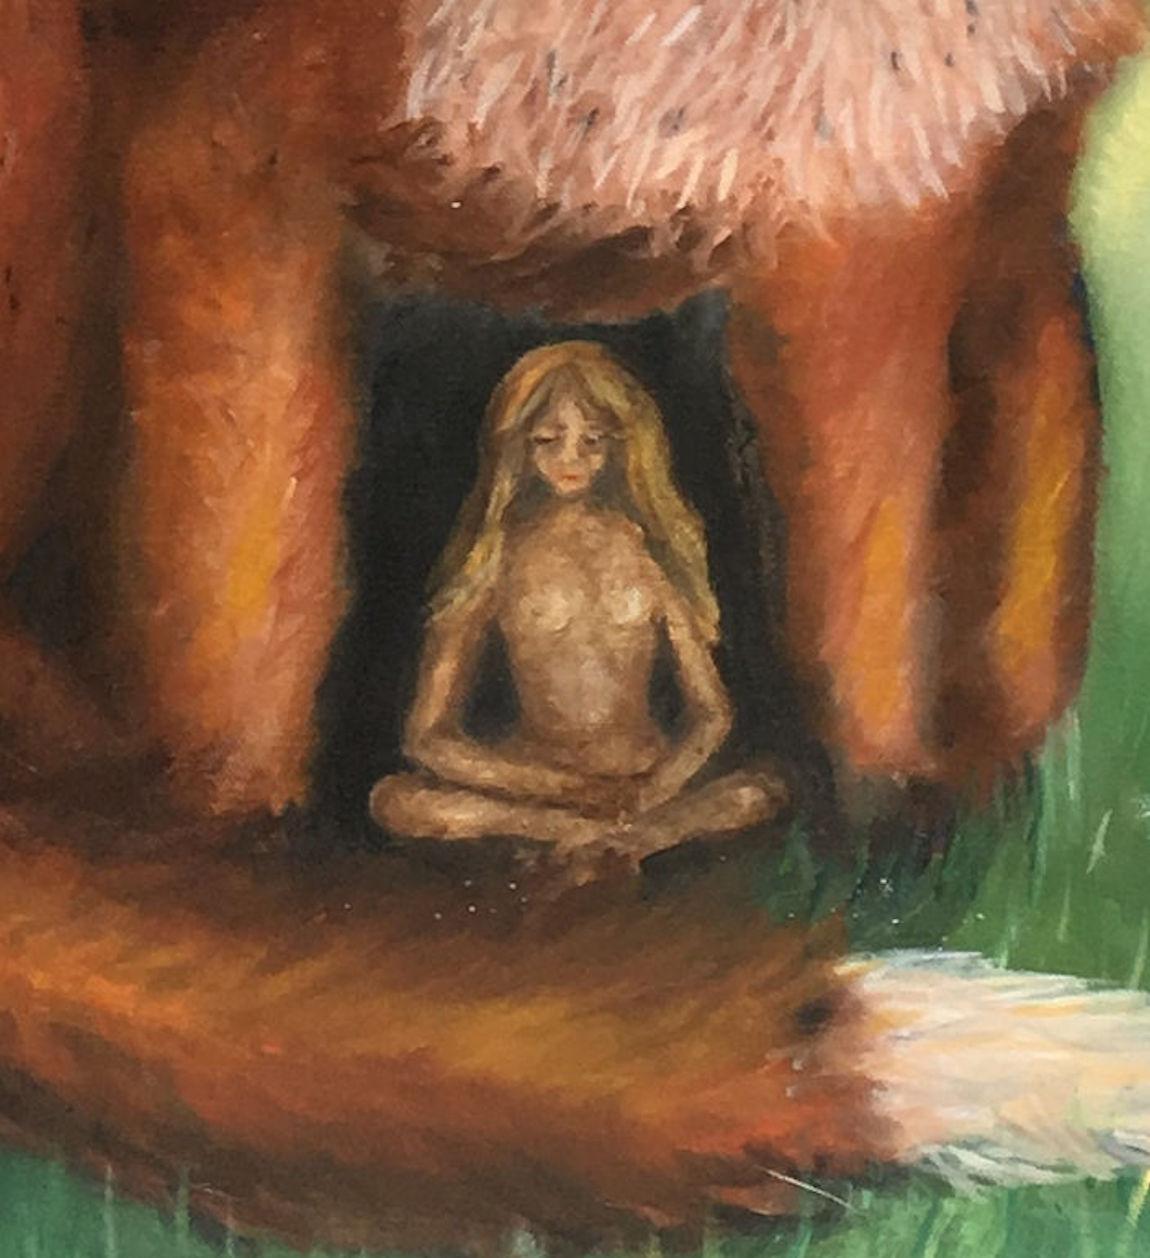 Contemporary, naturalistic oil on canvas painting by the Danish painter Bente Ørum, 2016.

... the fox is the main character in this painting... or is it the young girl who is hiding/living inbetween his legs?

About the artist:
Bente Ørum's